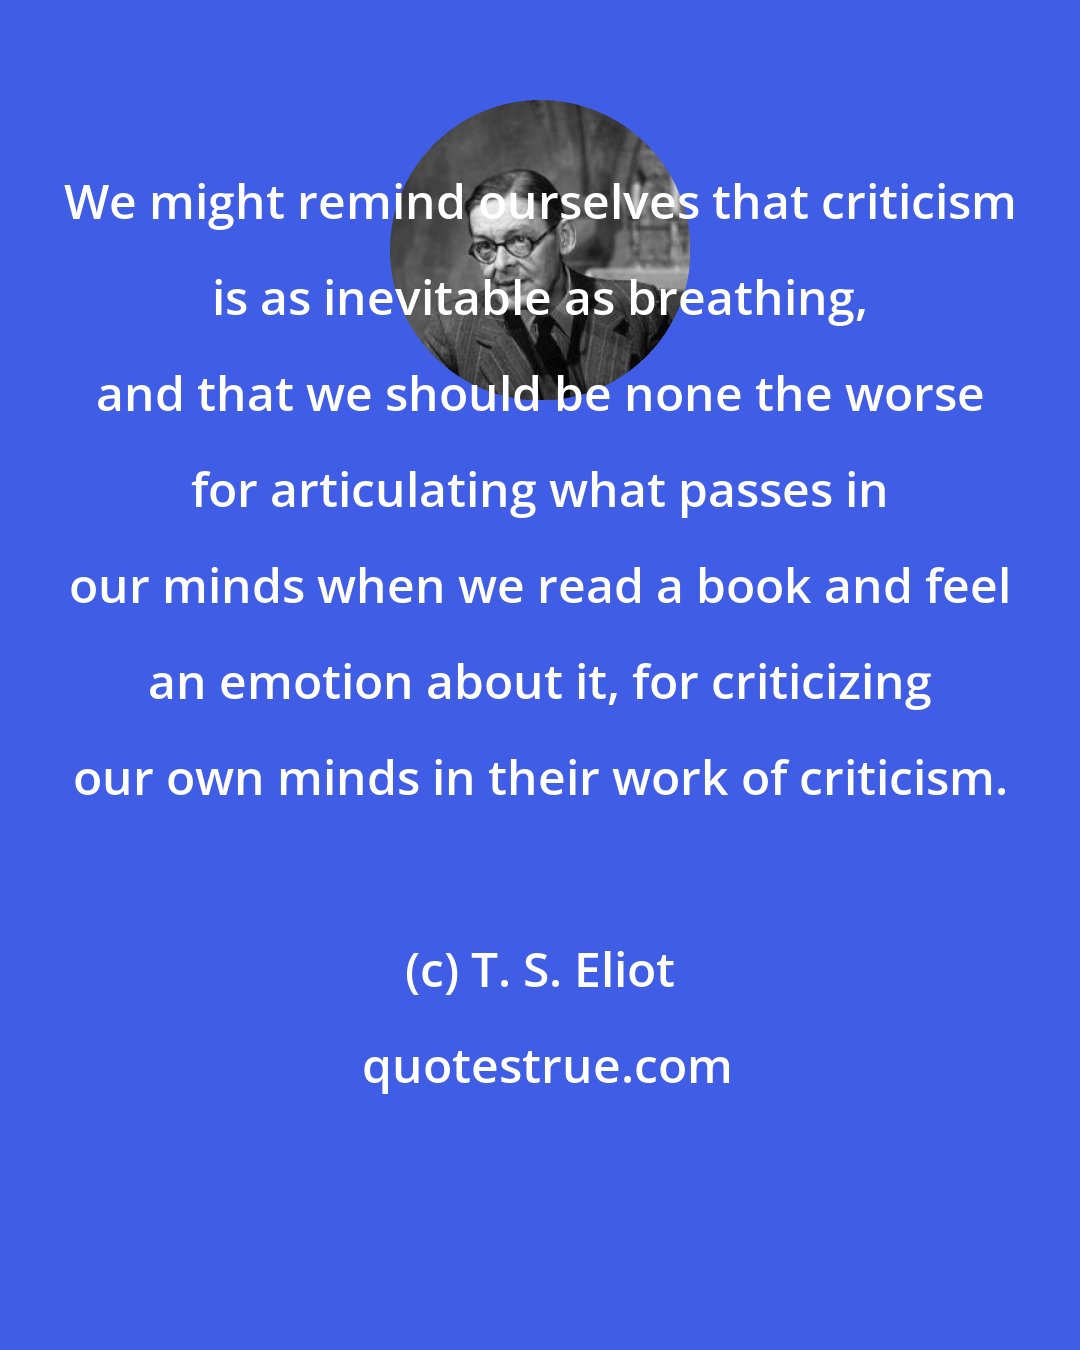 T. S. Eliot: We might remind ourselves that criticism is as inevitable as breathing, and that we should be none the worse for articulating what passes in our minds when we read a book and feel an emotion about it, for criticizing our own minds in their work of criticism.